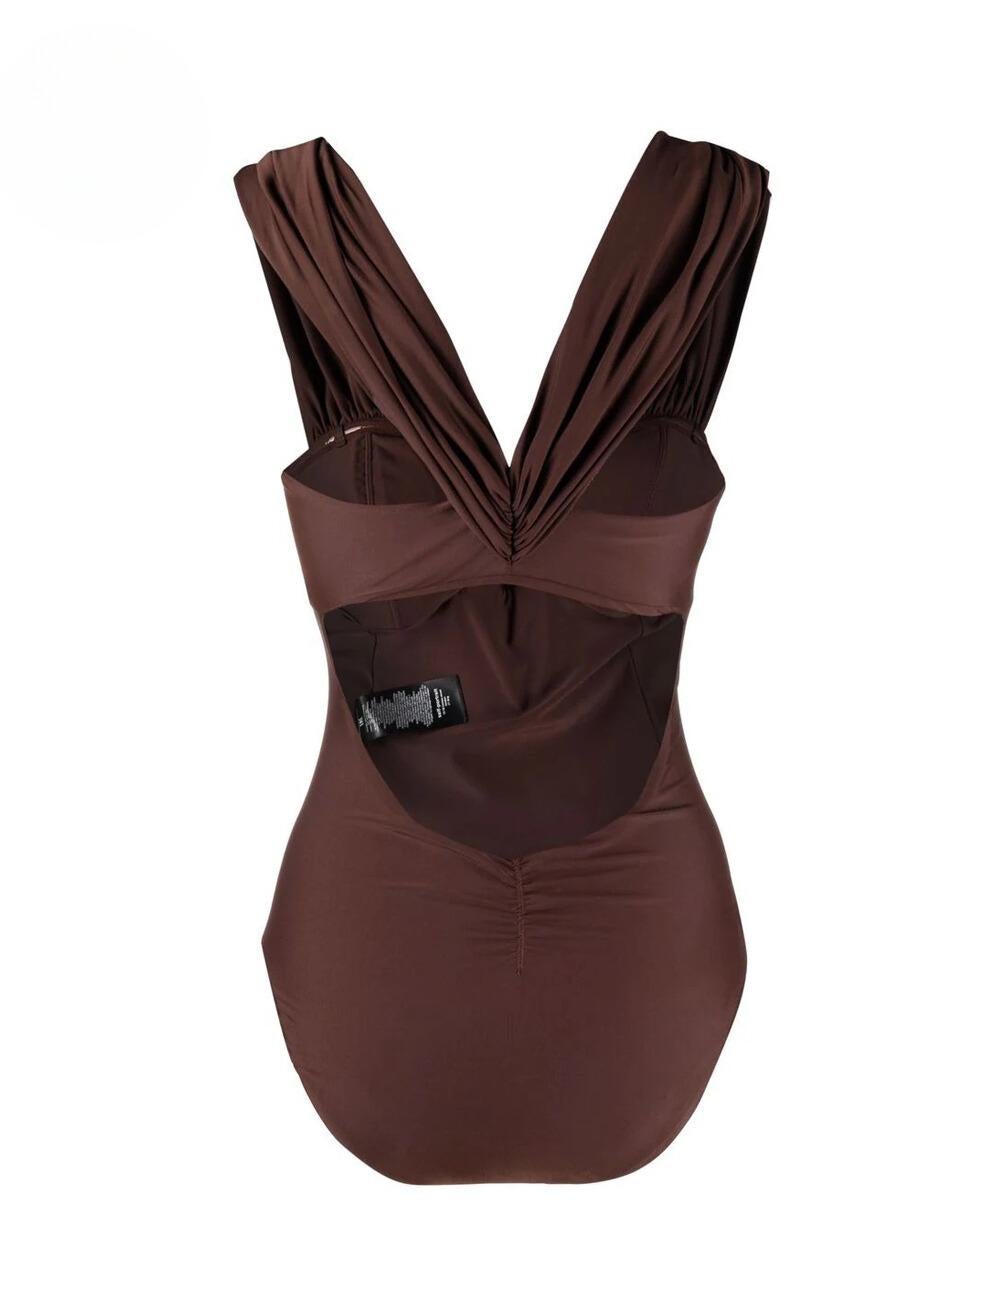 Self Portrait Brown Cut-out Draped Swimsuit featuring fully draped, cut-out detailing, V-neck and slip-on style. 

Material: Polyester 
Size: UK 8 / US 4 
Condition Overall: New